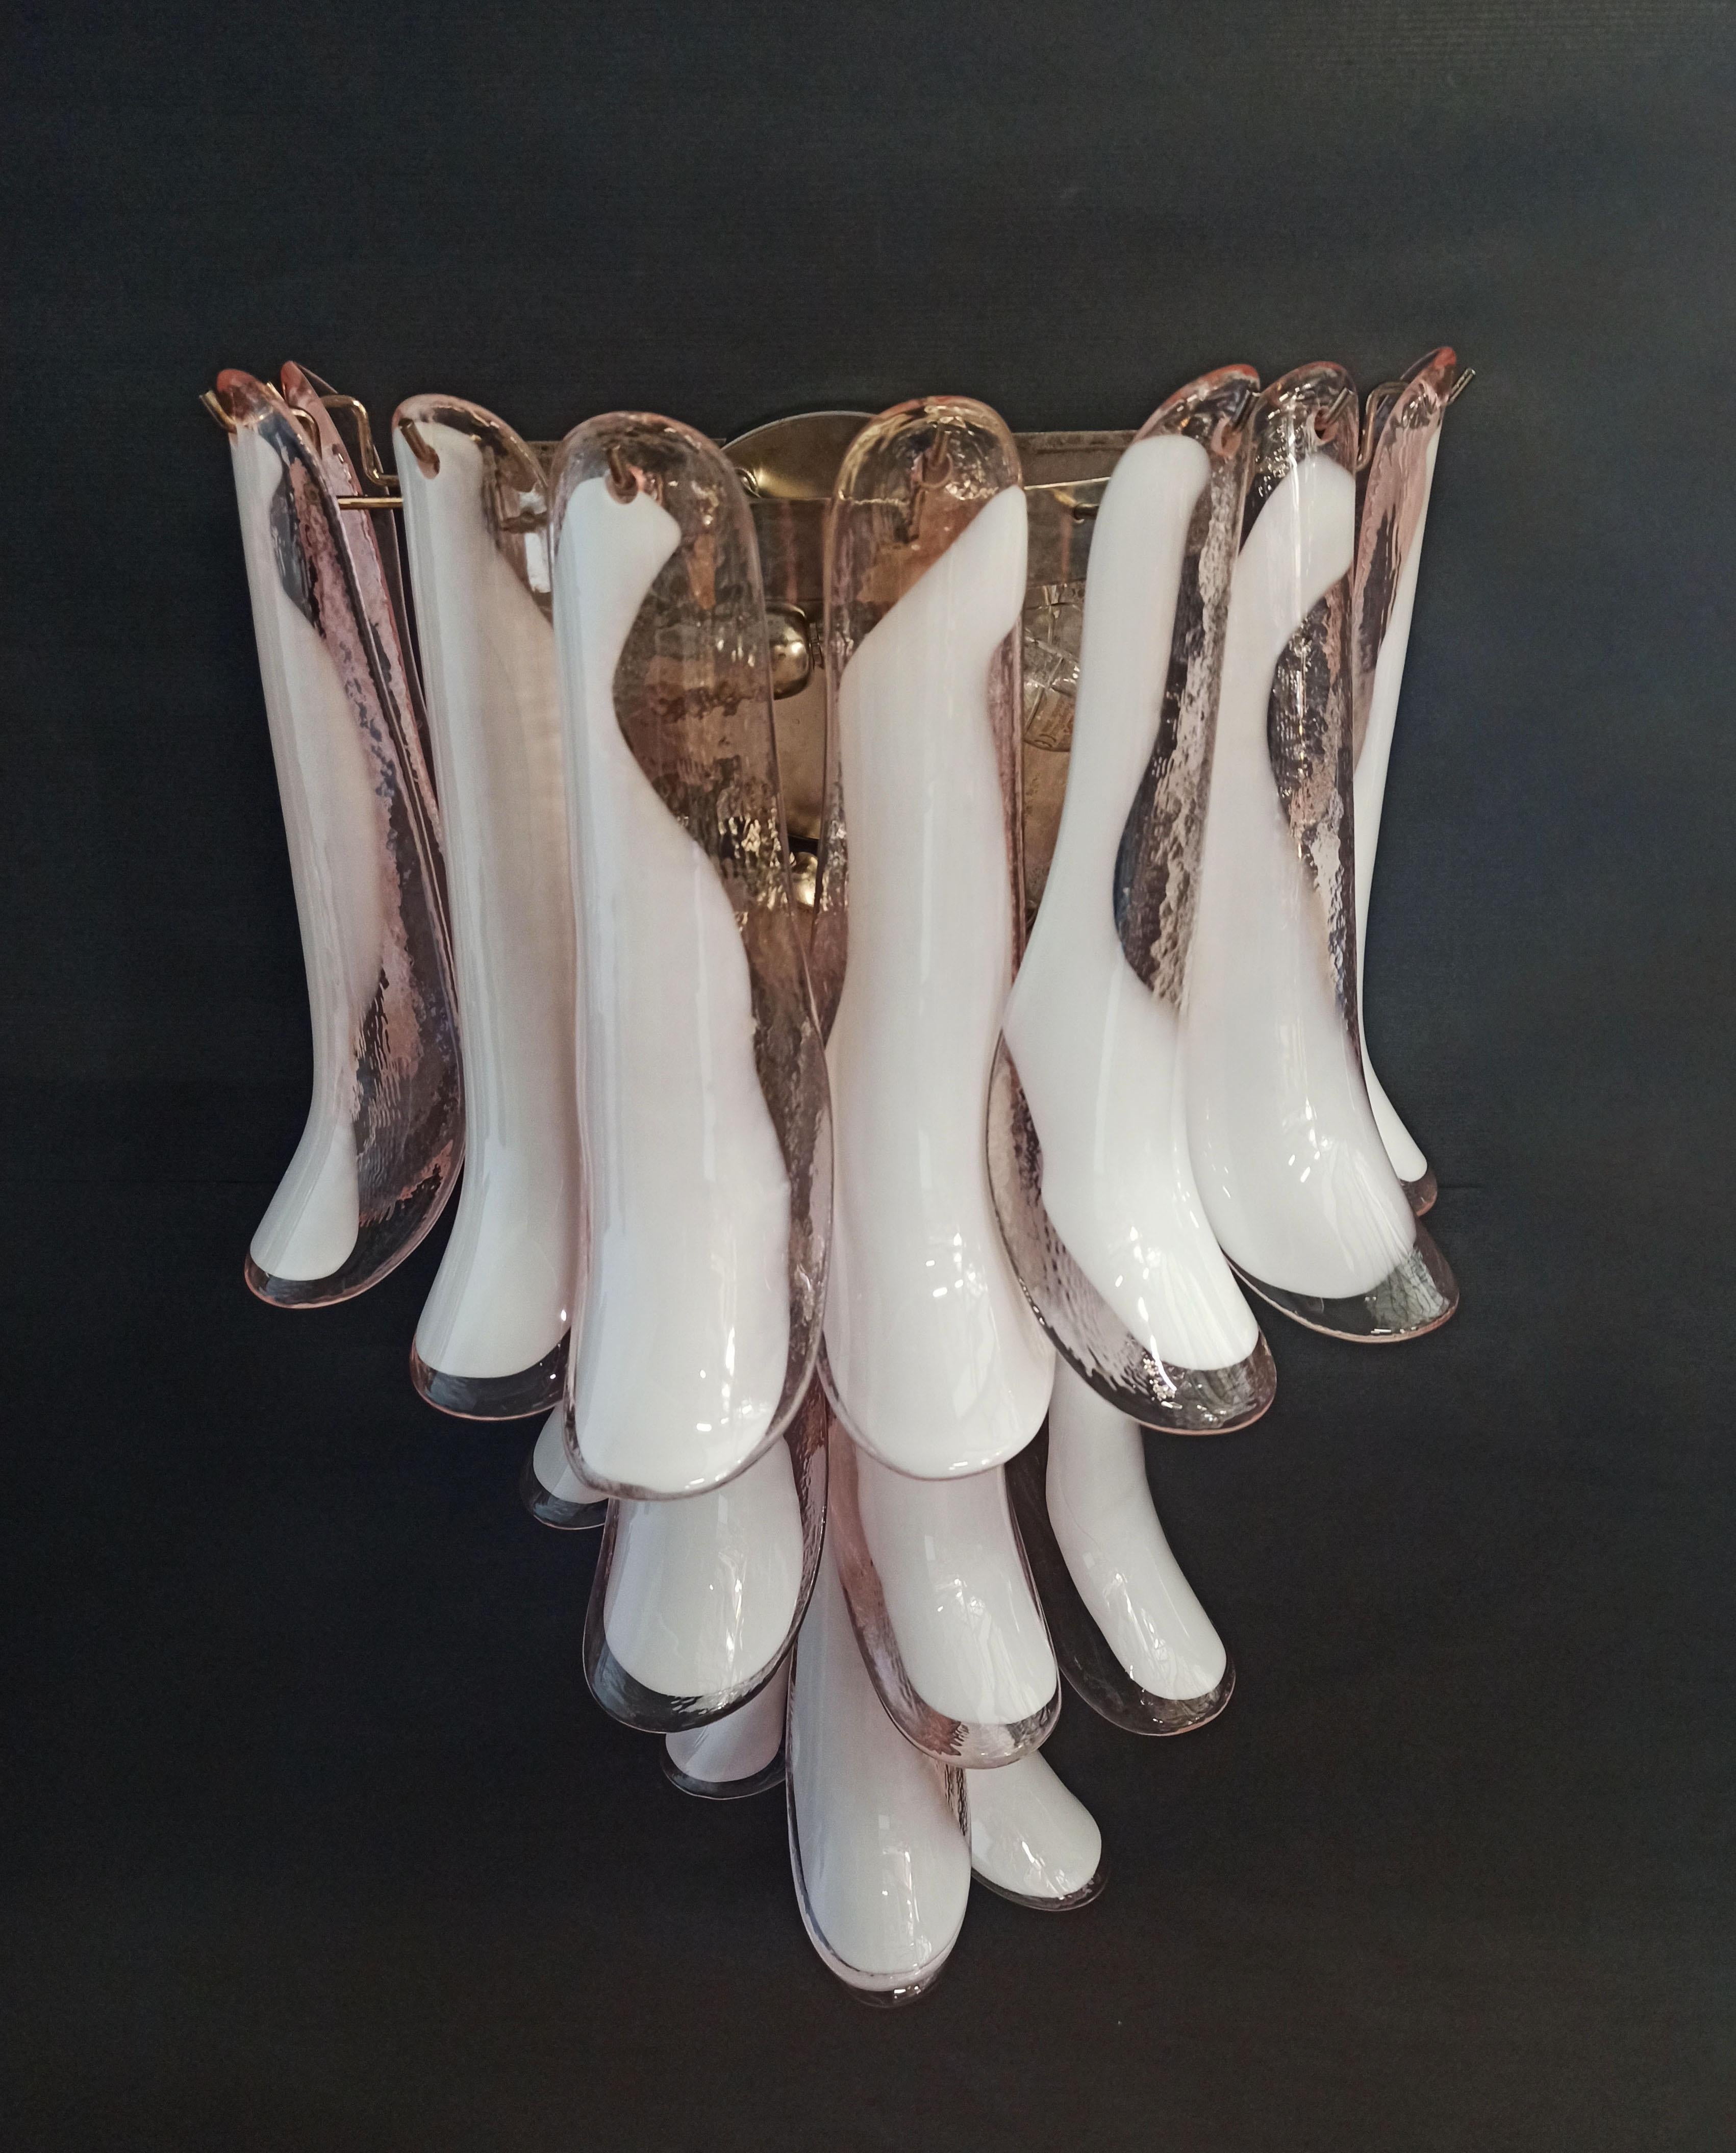 Pair of Vintage Italian Murano wall sconces. Wall lights have 16 pink and white“lattimo” glasses (for each applique) in a nickel-plated metal frame. Decorative object of great importance.
Period: late XX century
Dimensions: 27,90 inches (72 cm)